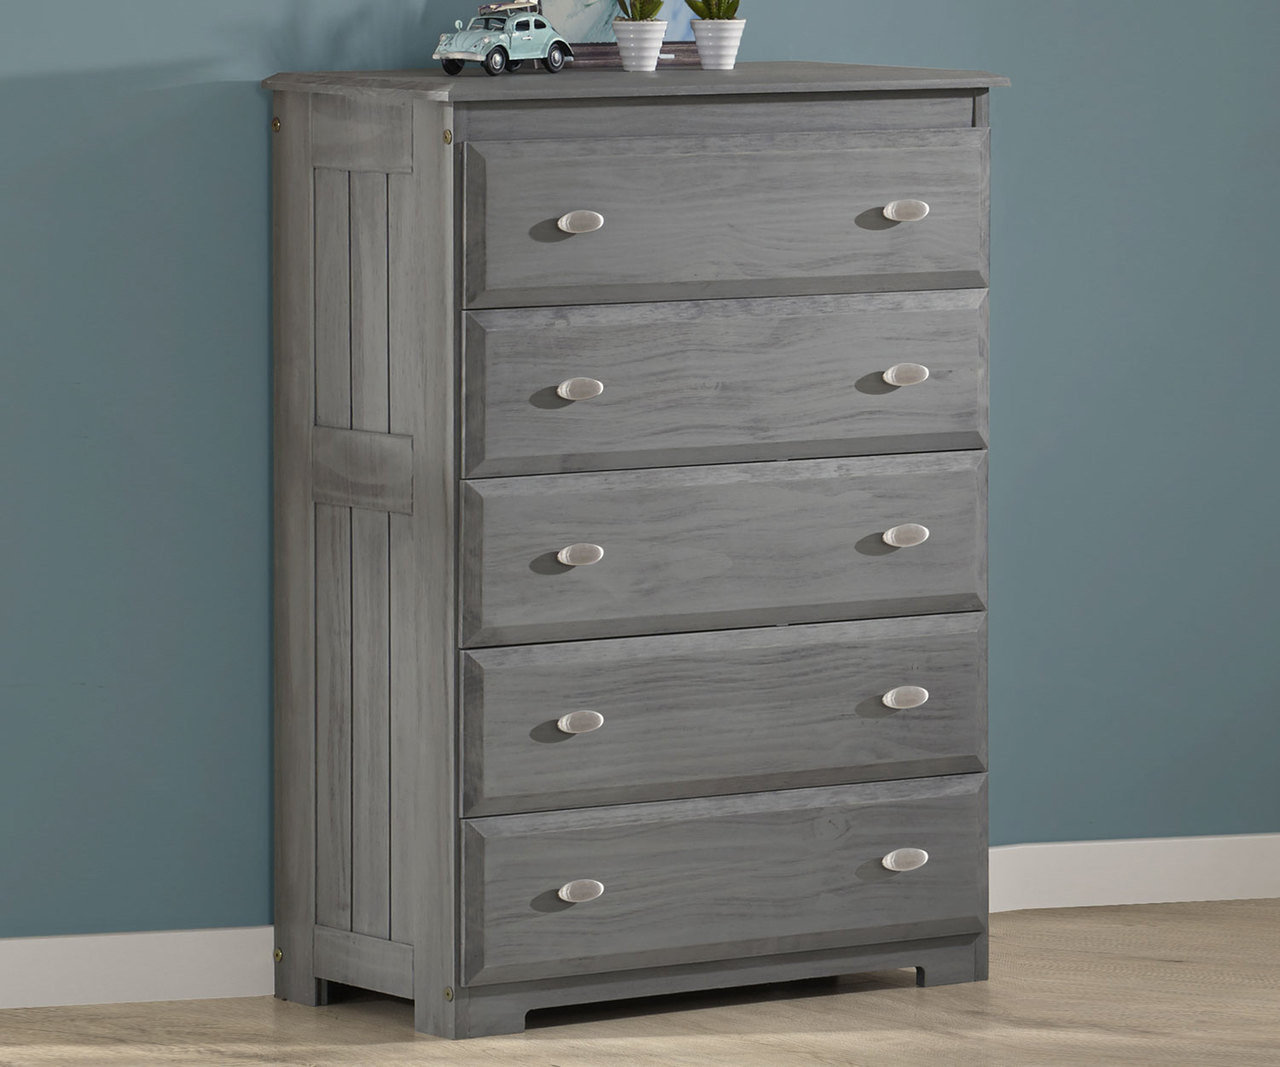 Discovery World Furniture 5 Drawer Chest Kids Furniture